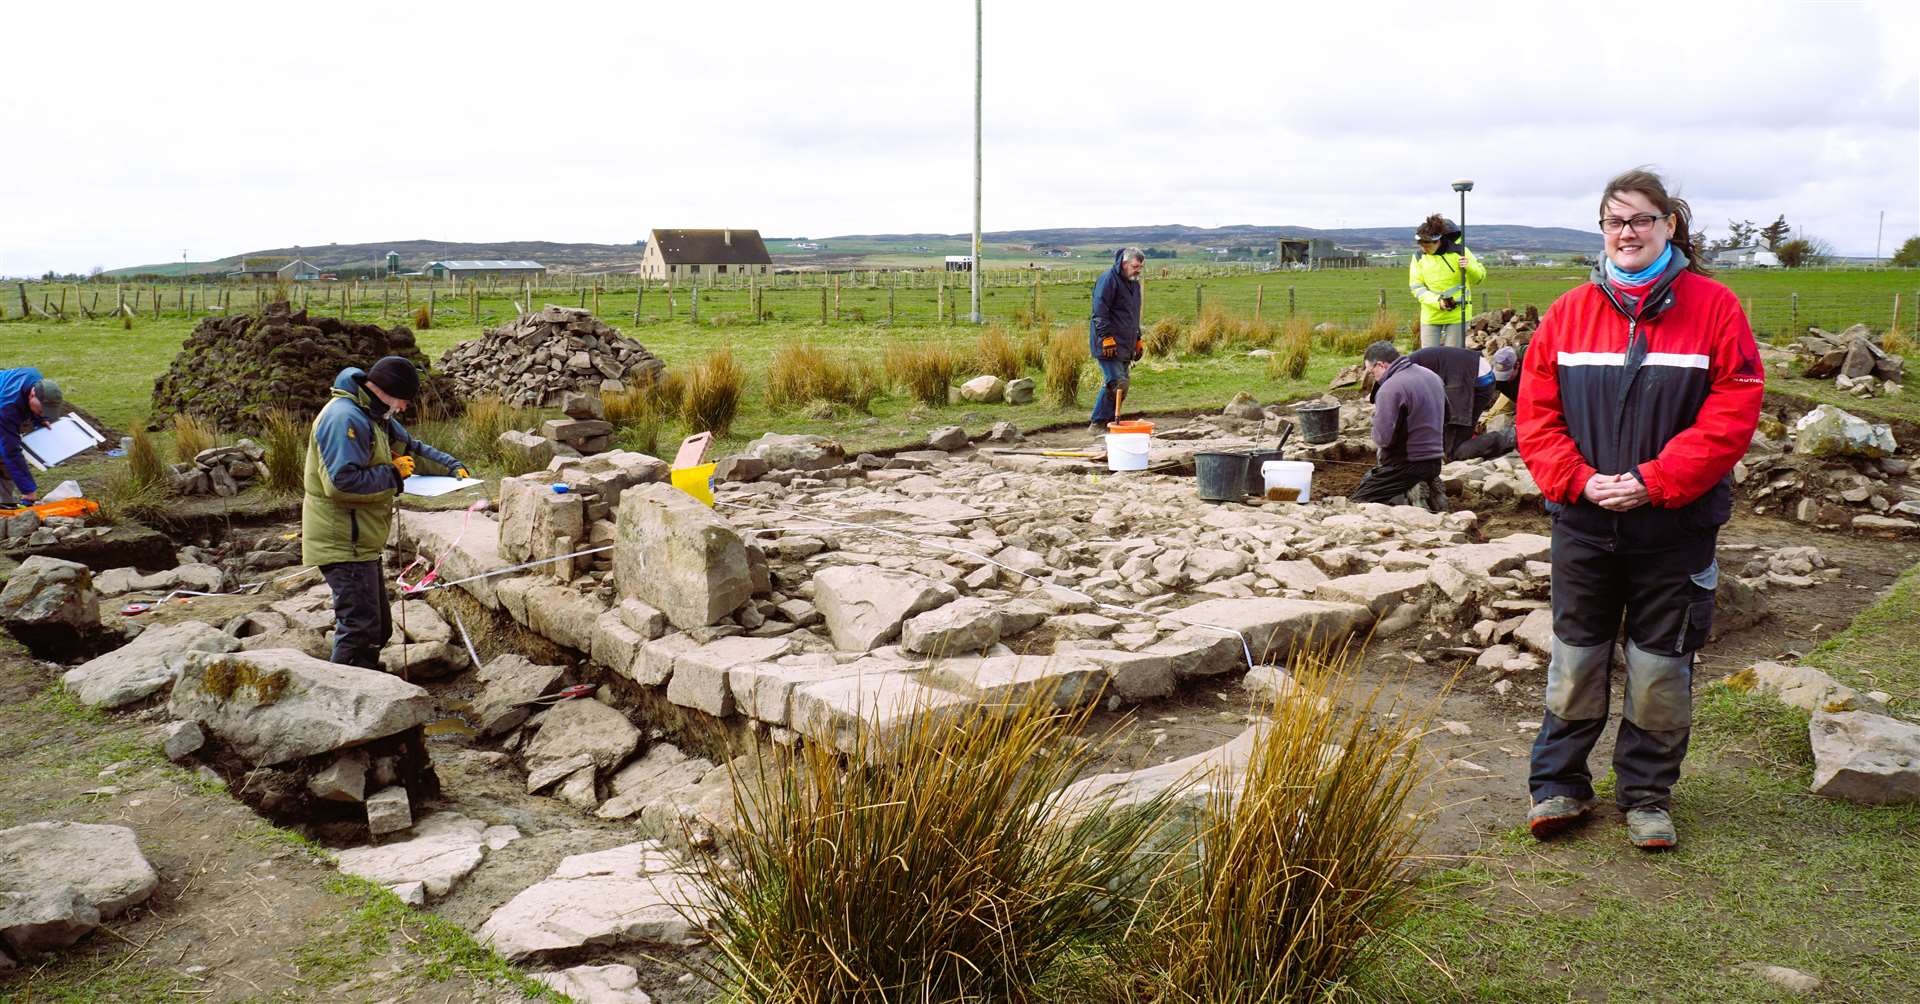 Local archaeologist Mary Shand showed visitors around the site at the special open day event last weekend. Picture: DGS